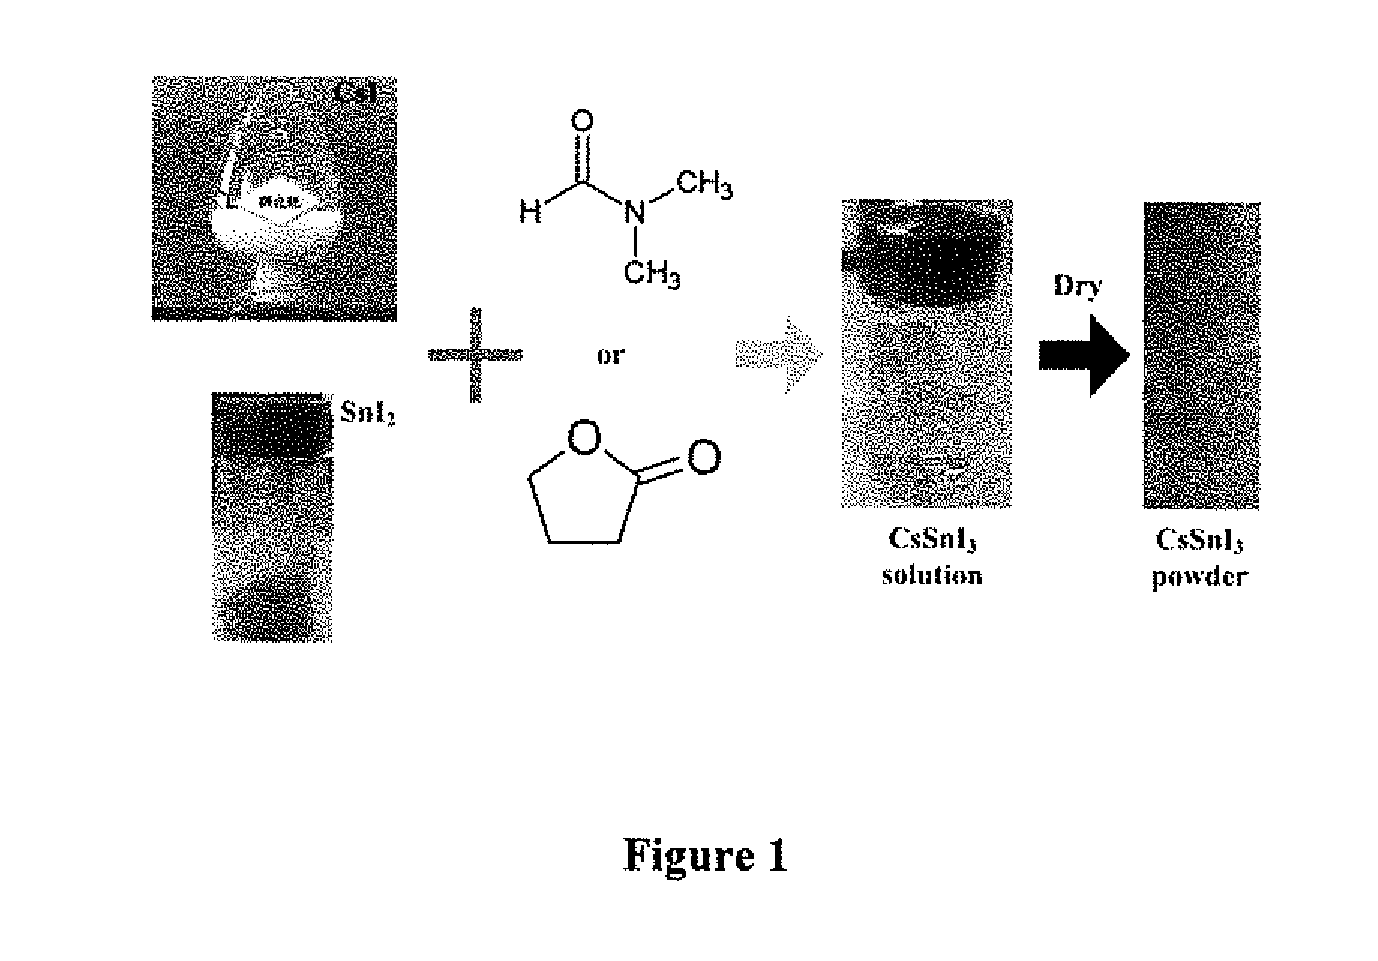 SYNTHESIS OF CsSnI3 BY A SOLUTION BASED METHOD